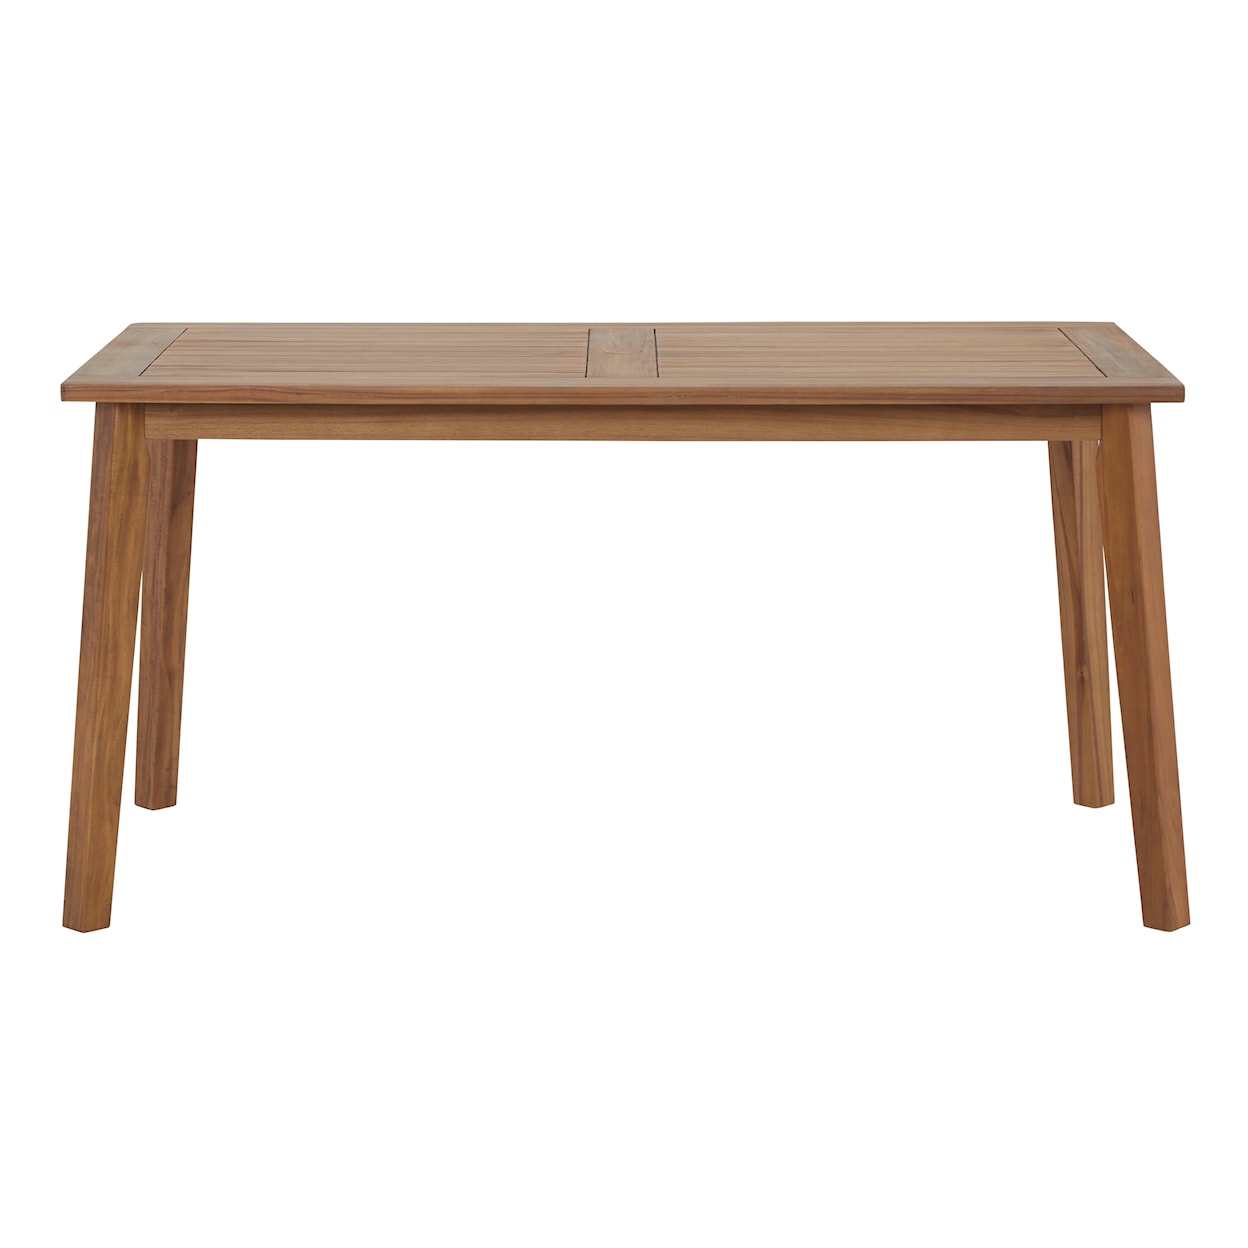 Signature Design Janiyah Outdoor Dining Table